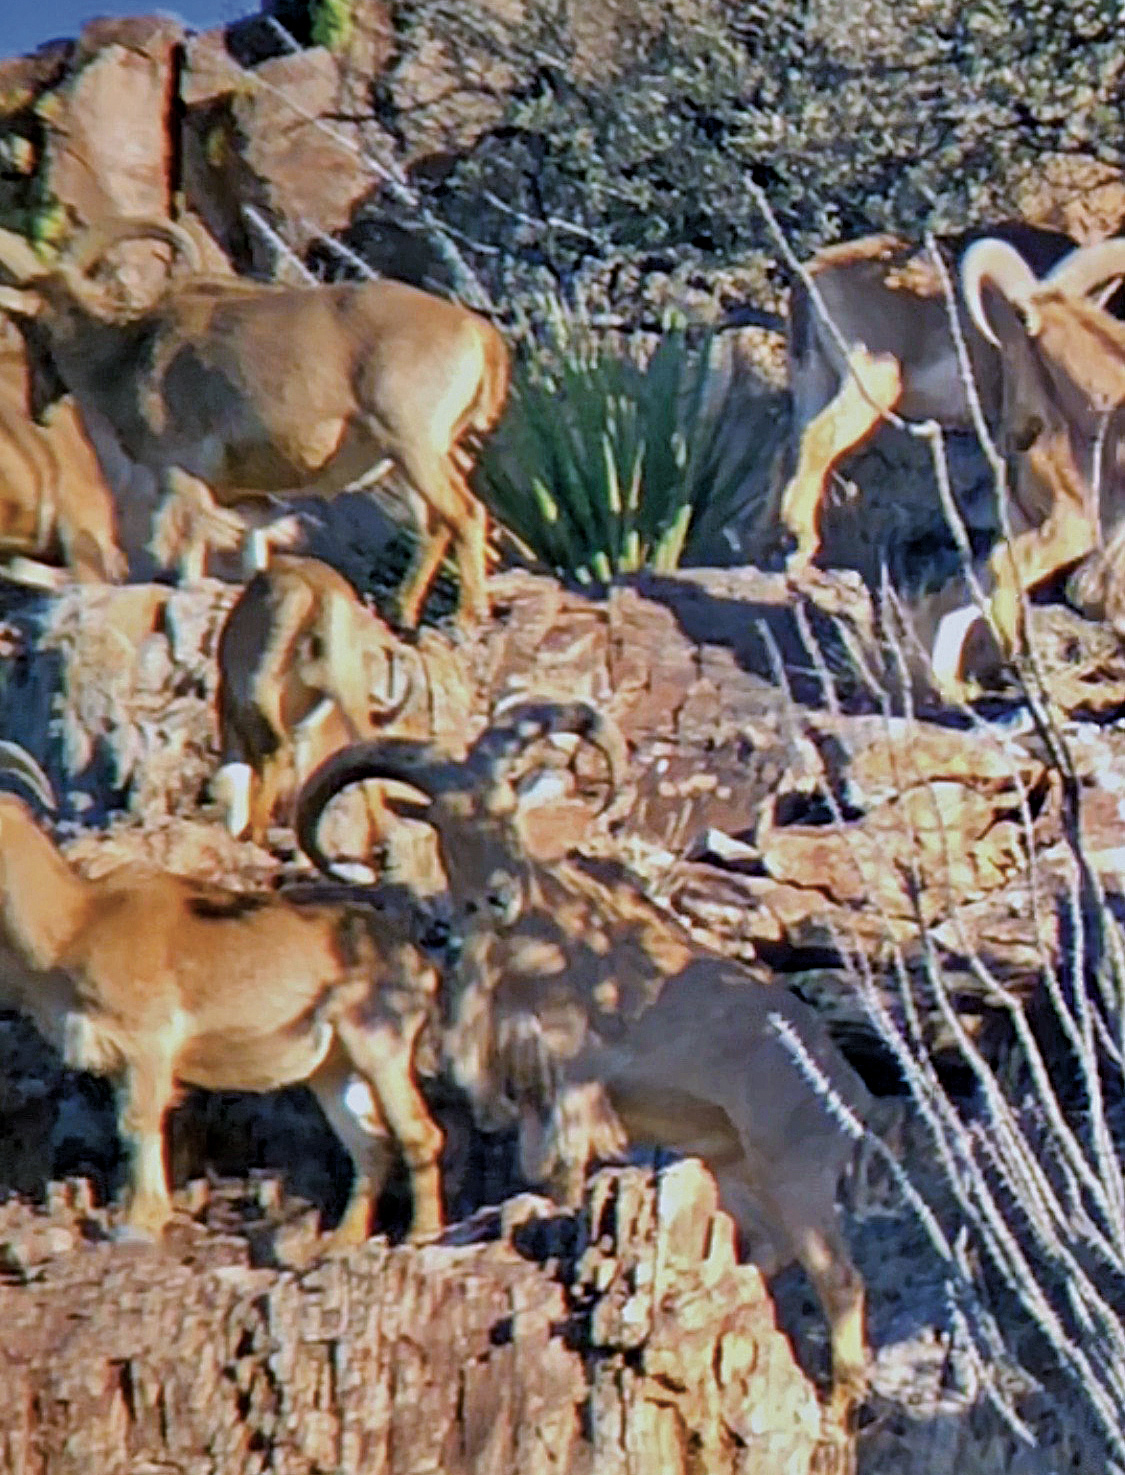 free range aoudad spotted through a scope.